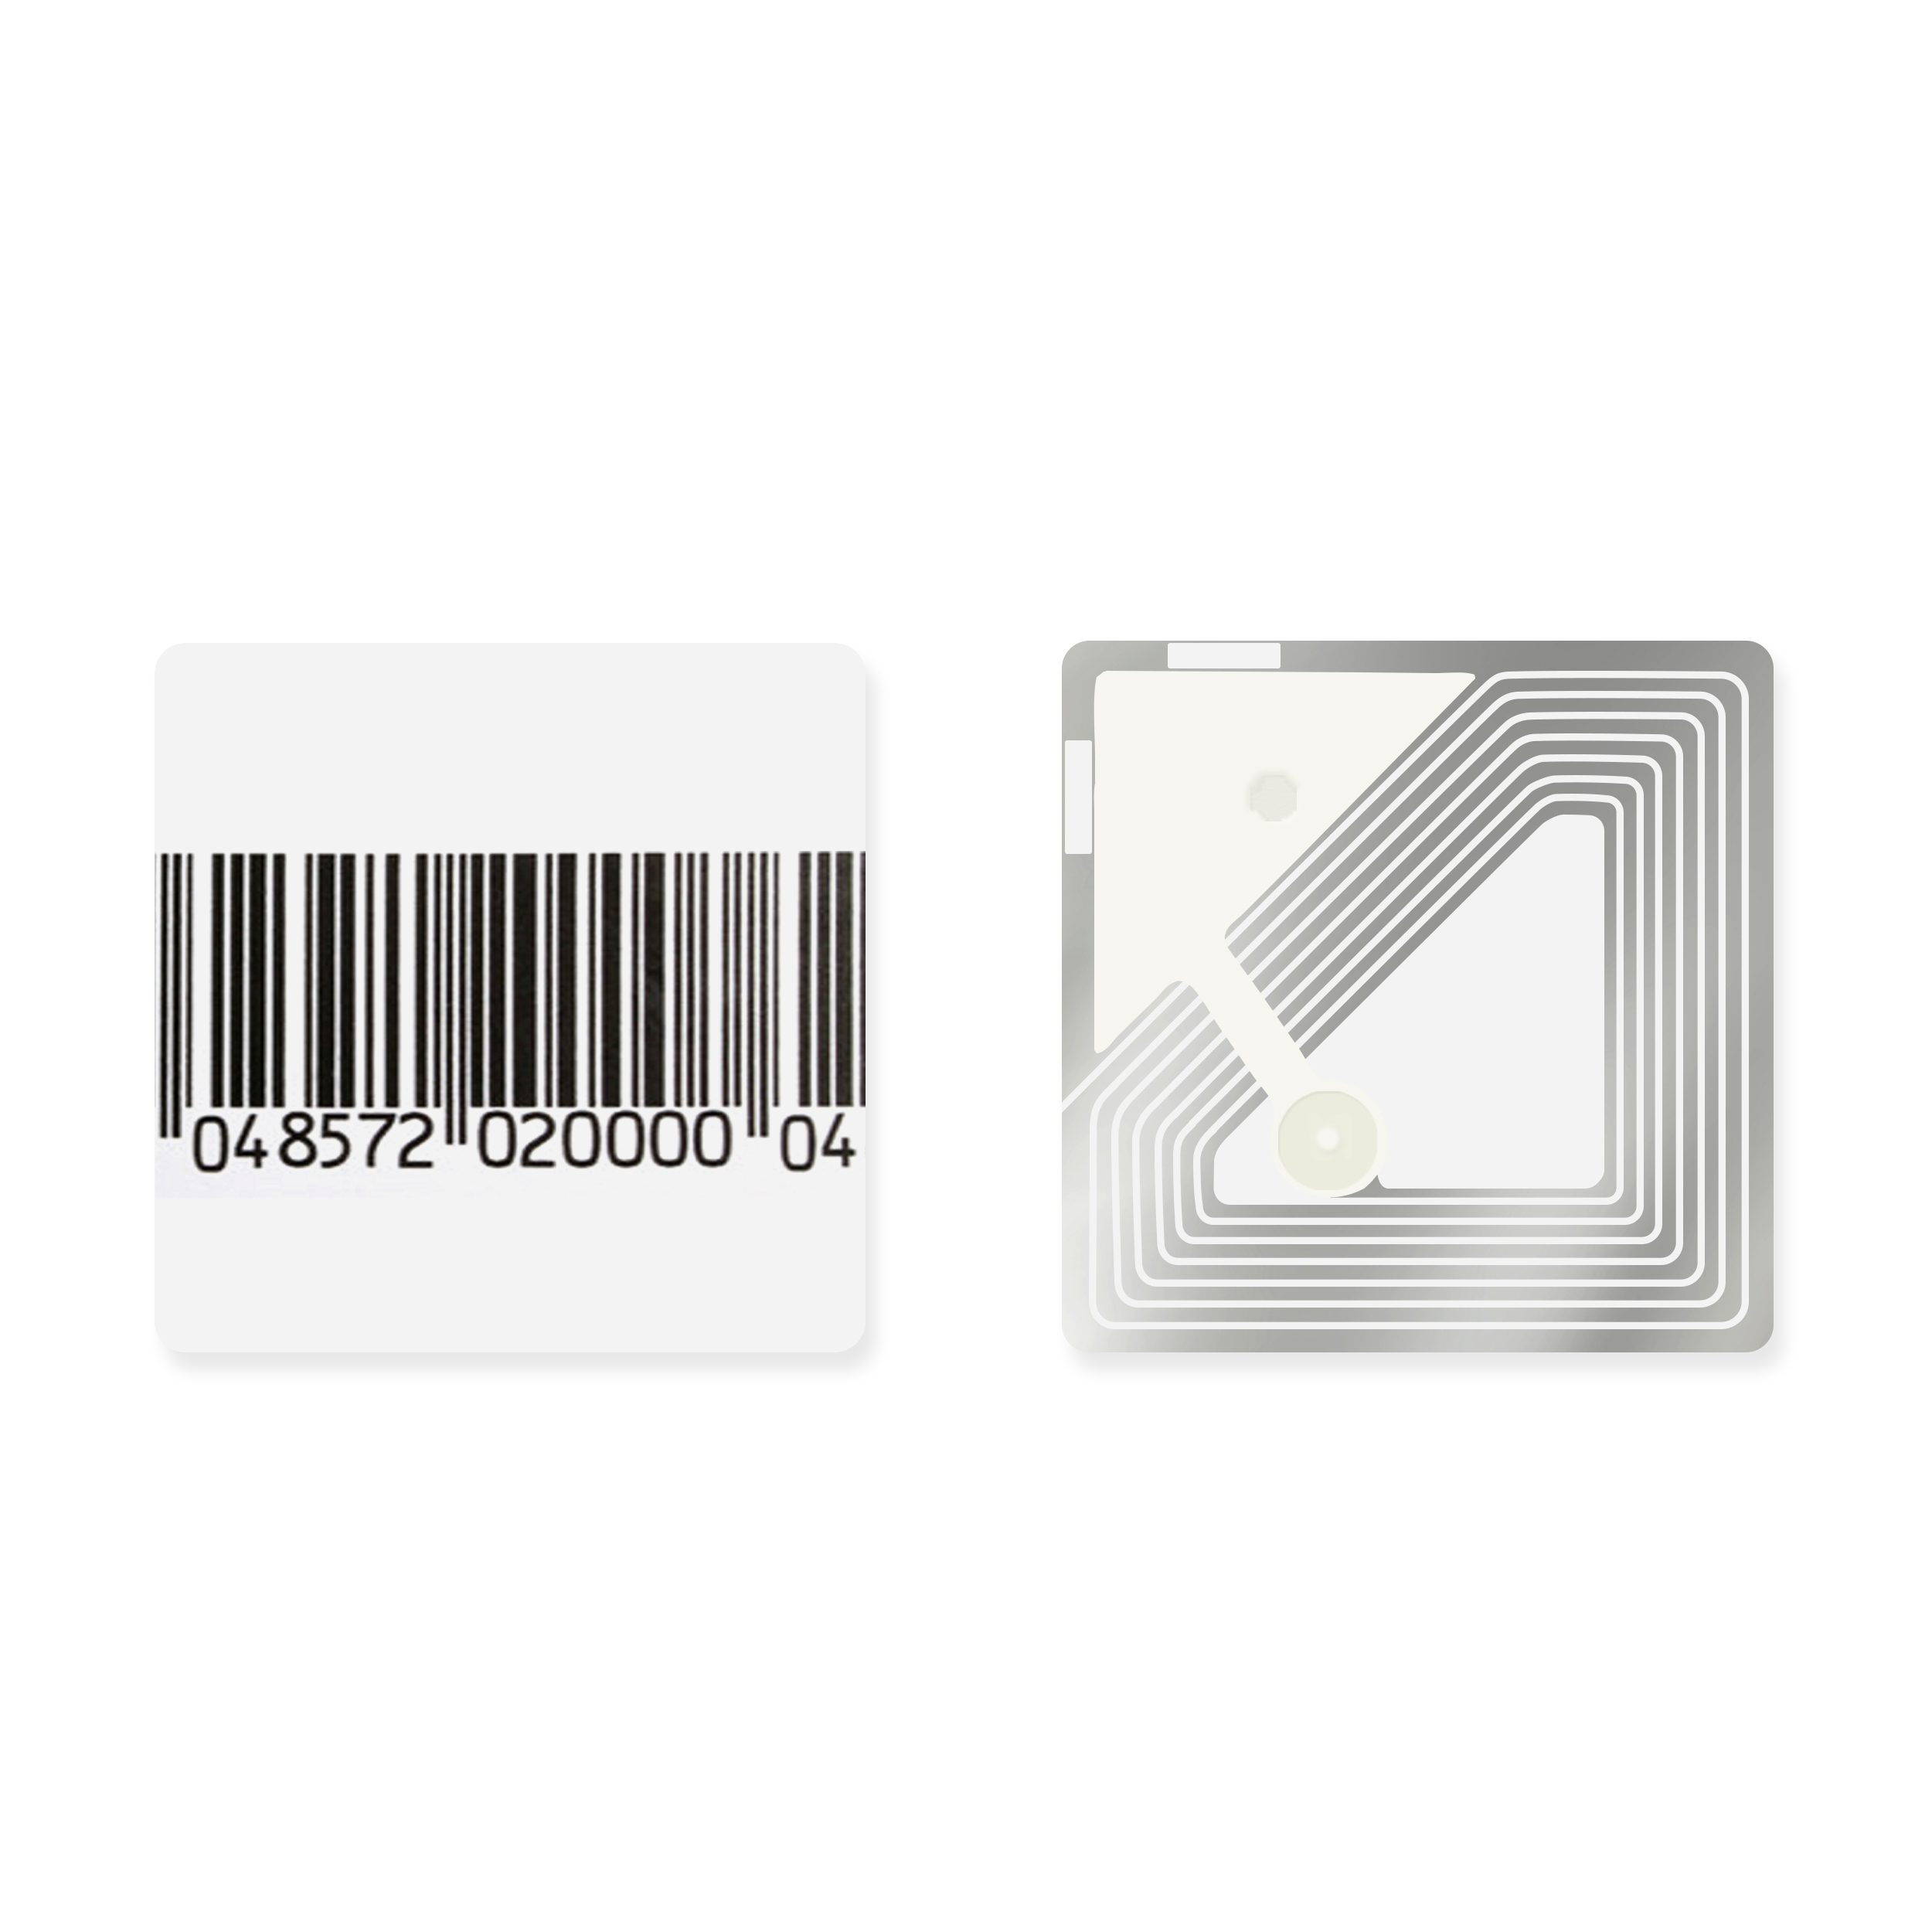 RF2525 Epowsens anti theft security labels retail loss prevention 25x25mm small RF label